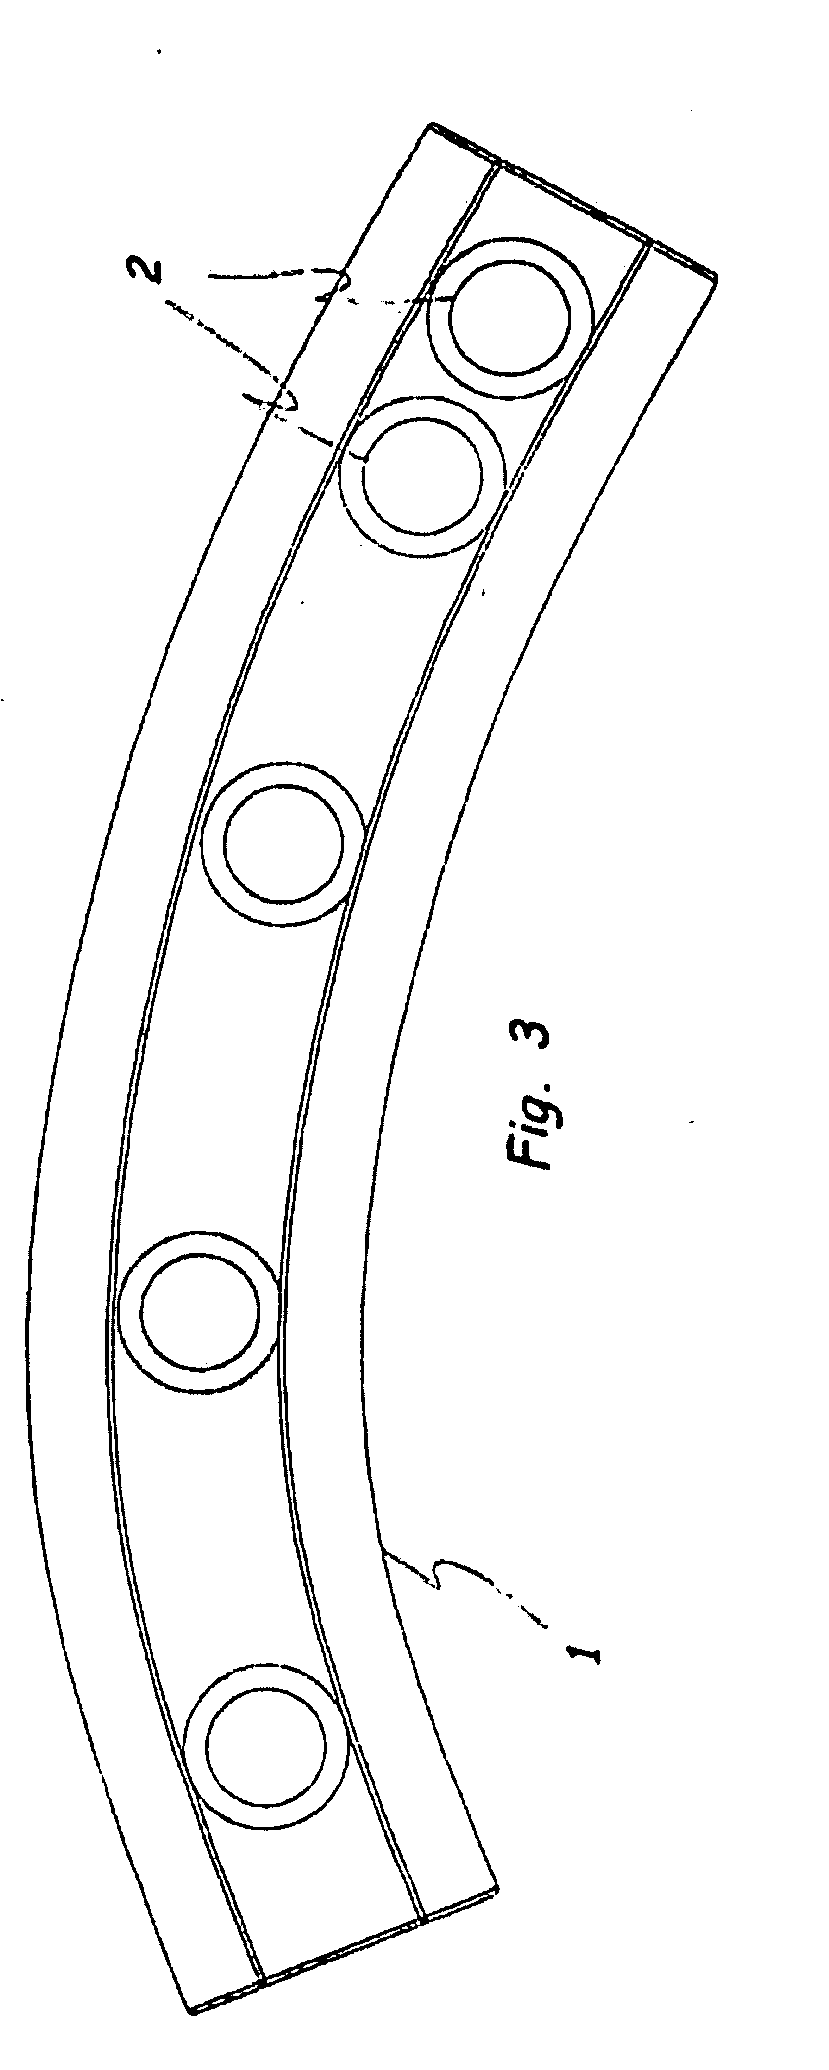 Method and system for the intramedullary fixation of a fractured bone